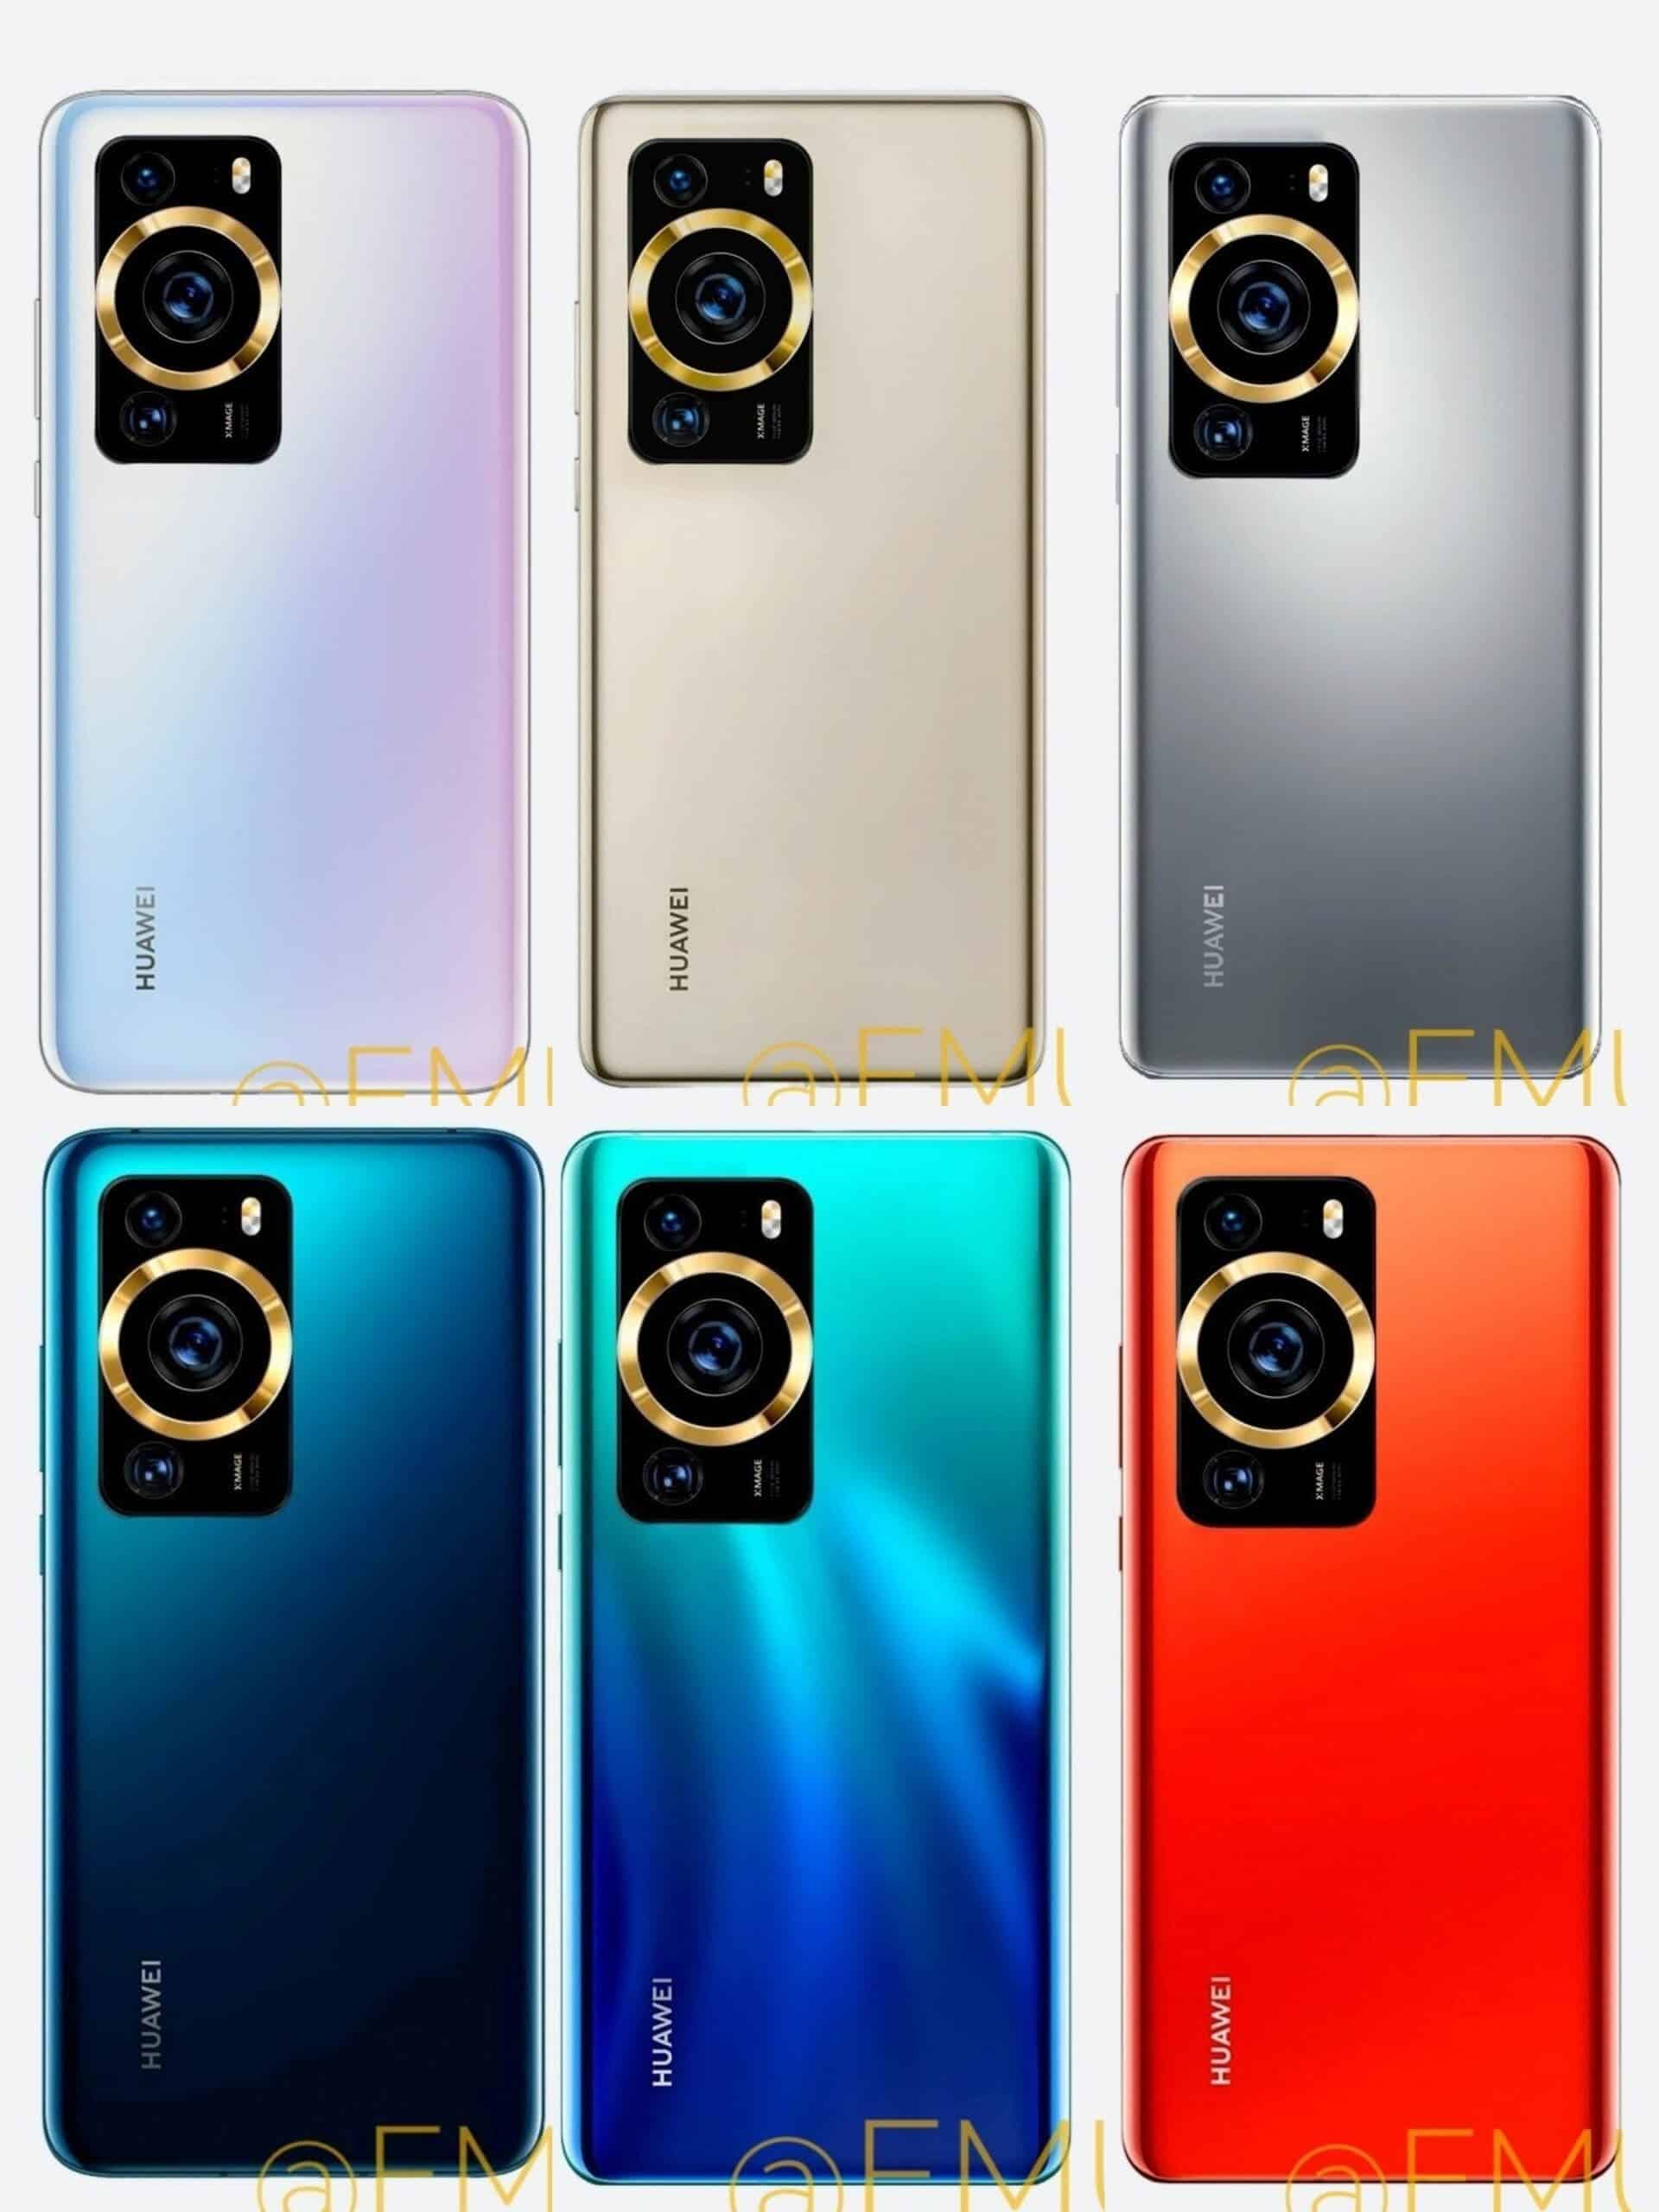 Huawei P60 series have been mass-produced - large market excites dealers - Gizchina.com